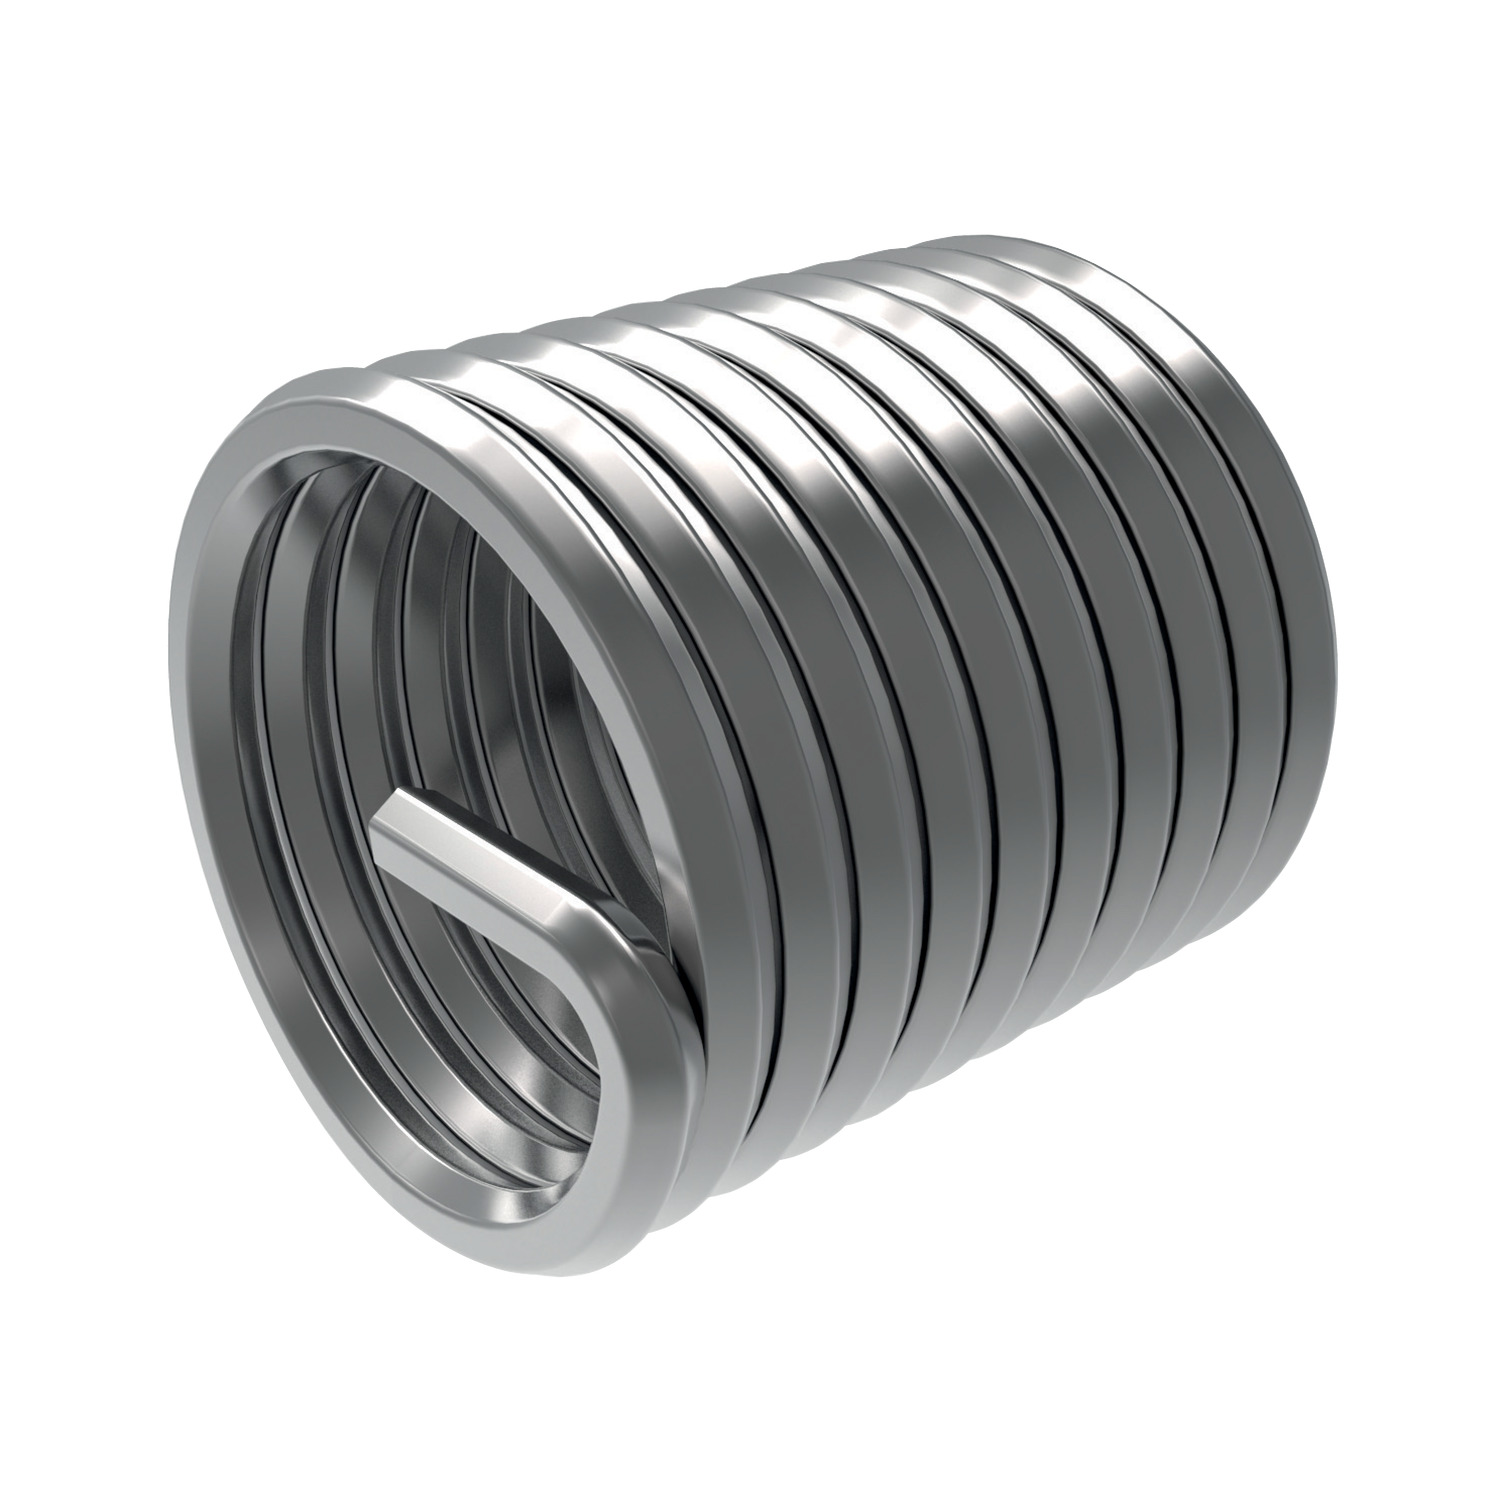 Wire Thread Inserts - Screw Lock A2 stainless steel 'screw lock' thread inserts. Prevailing torque design makes them useful in applications where there is cyclic vibration or impact.